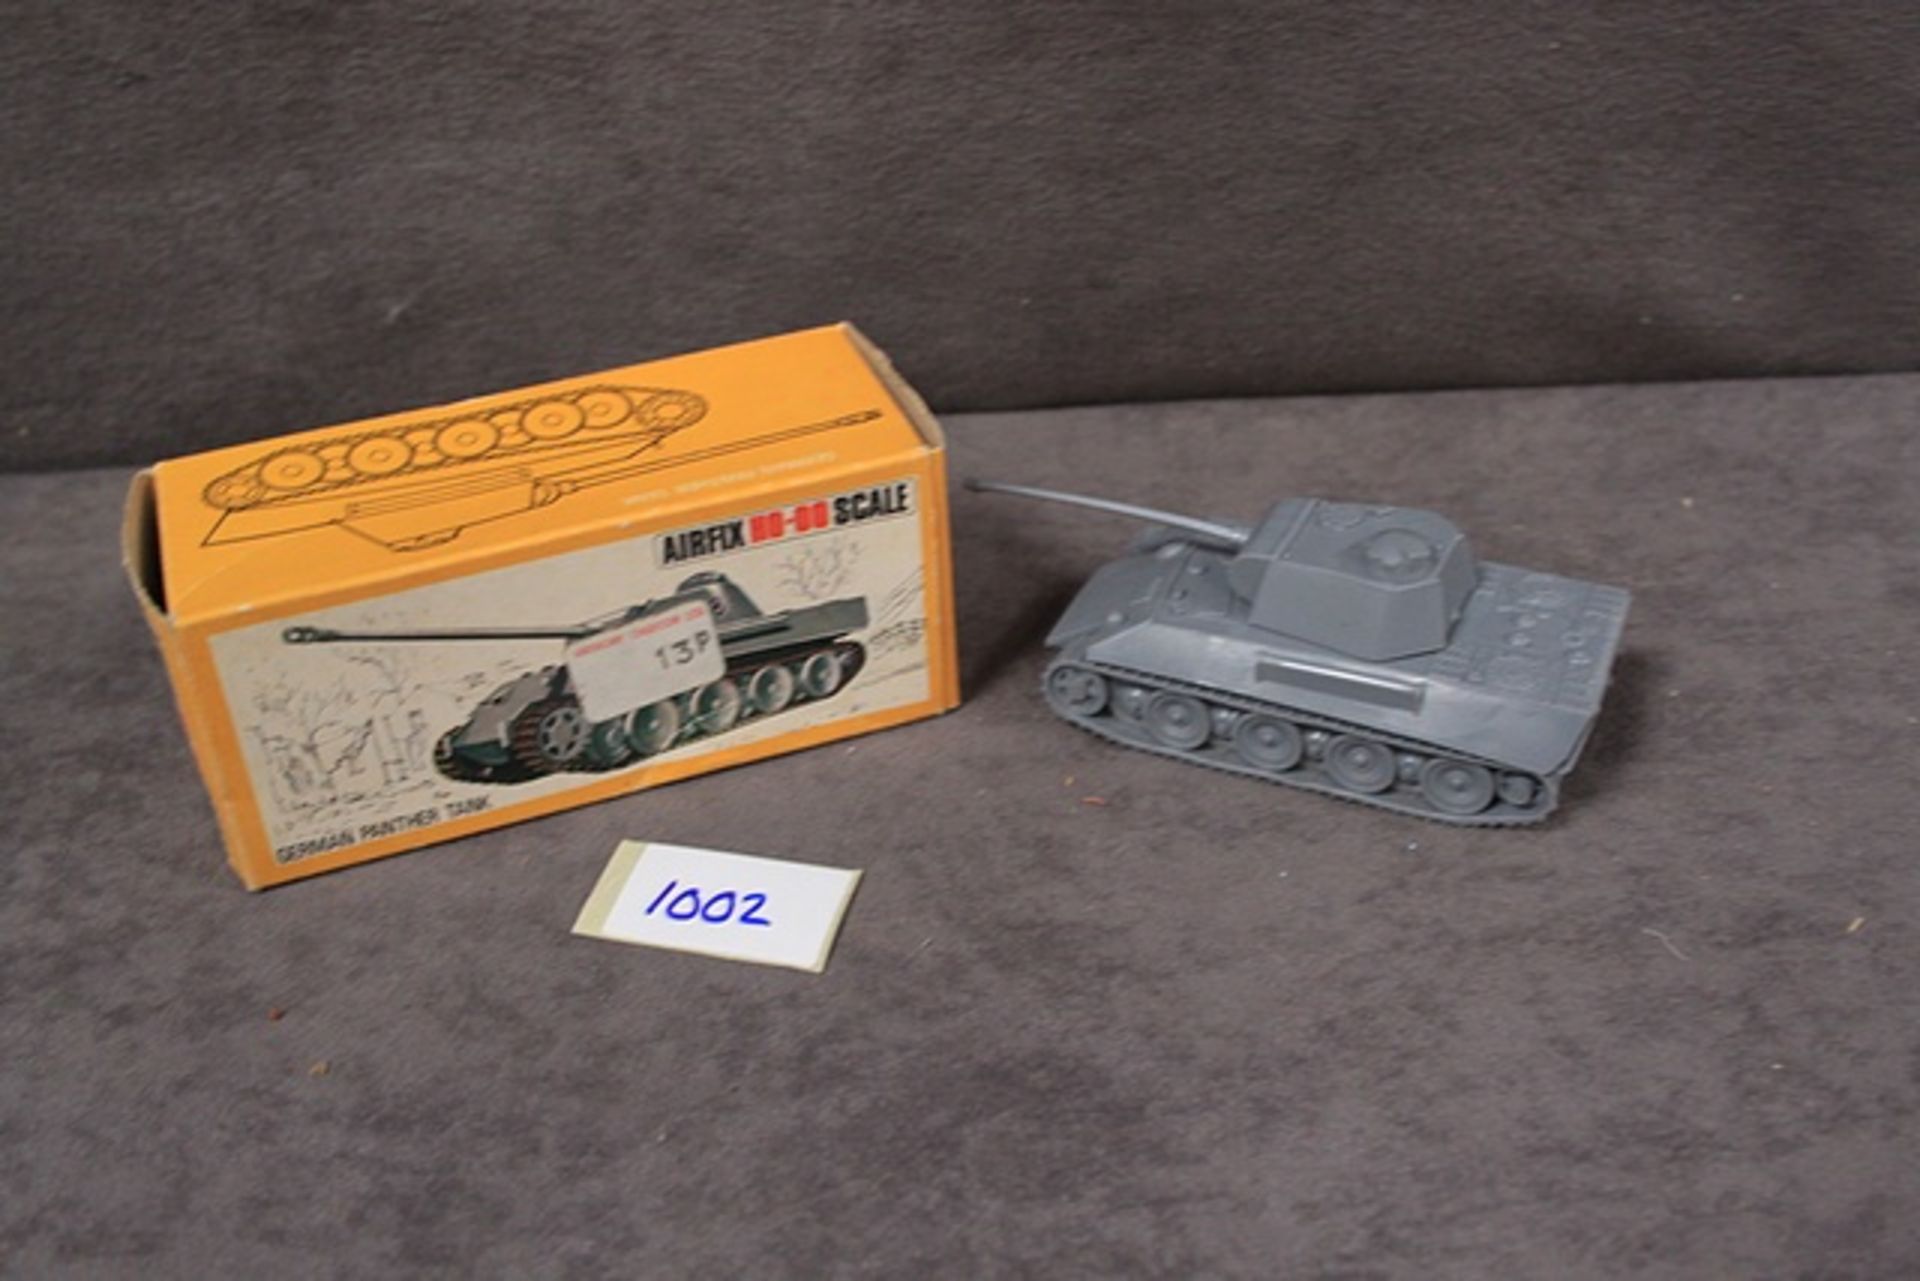 Airfix H0-00 Scale German Panther Tank in an excellent box